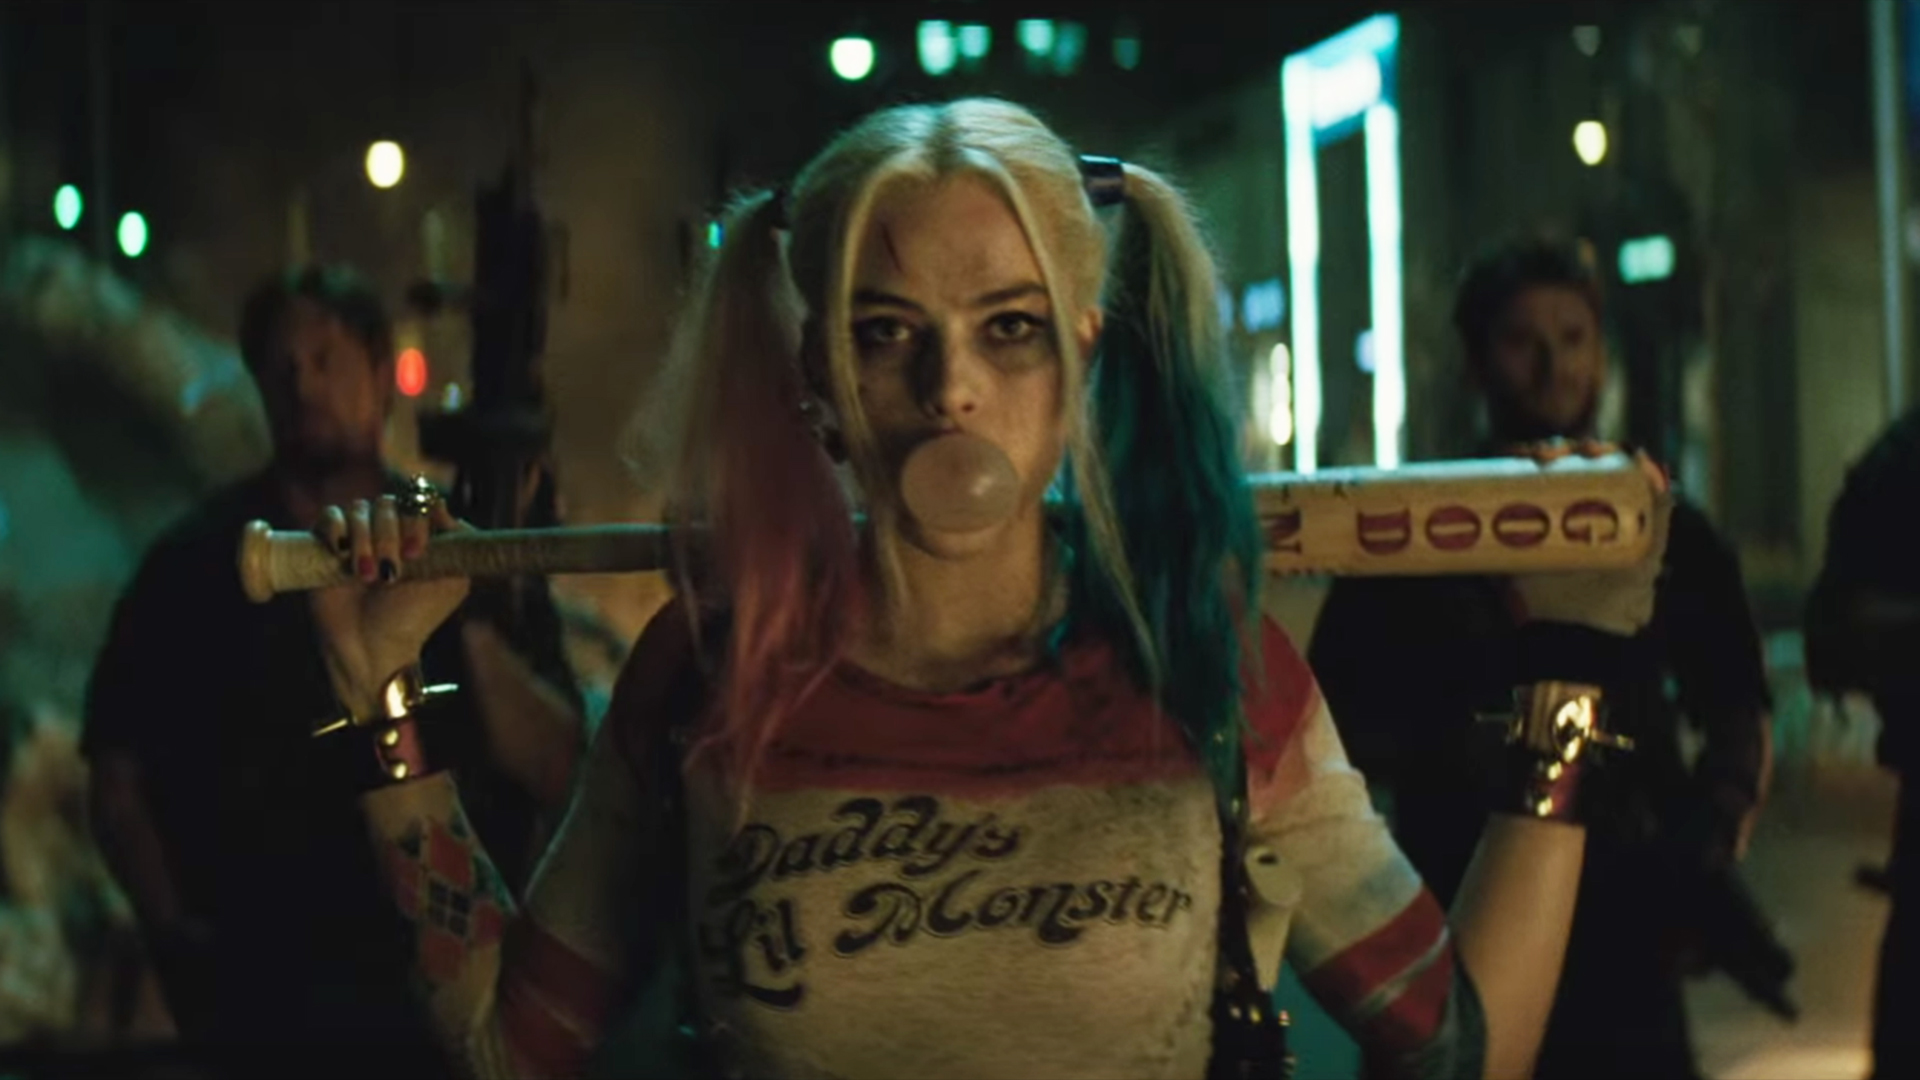 Free download Suicide Squad Space [1920x1080] for your Desktop, Mobile & Tablet. Explore Harley Quinn Suicide Squad Wallpaper. Suicide Squad Movie Wallpaper, Harley Quinn Wallpaper, Suicide Squad Joker Wallpaper